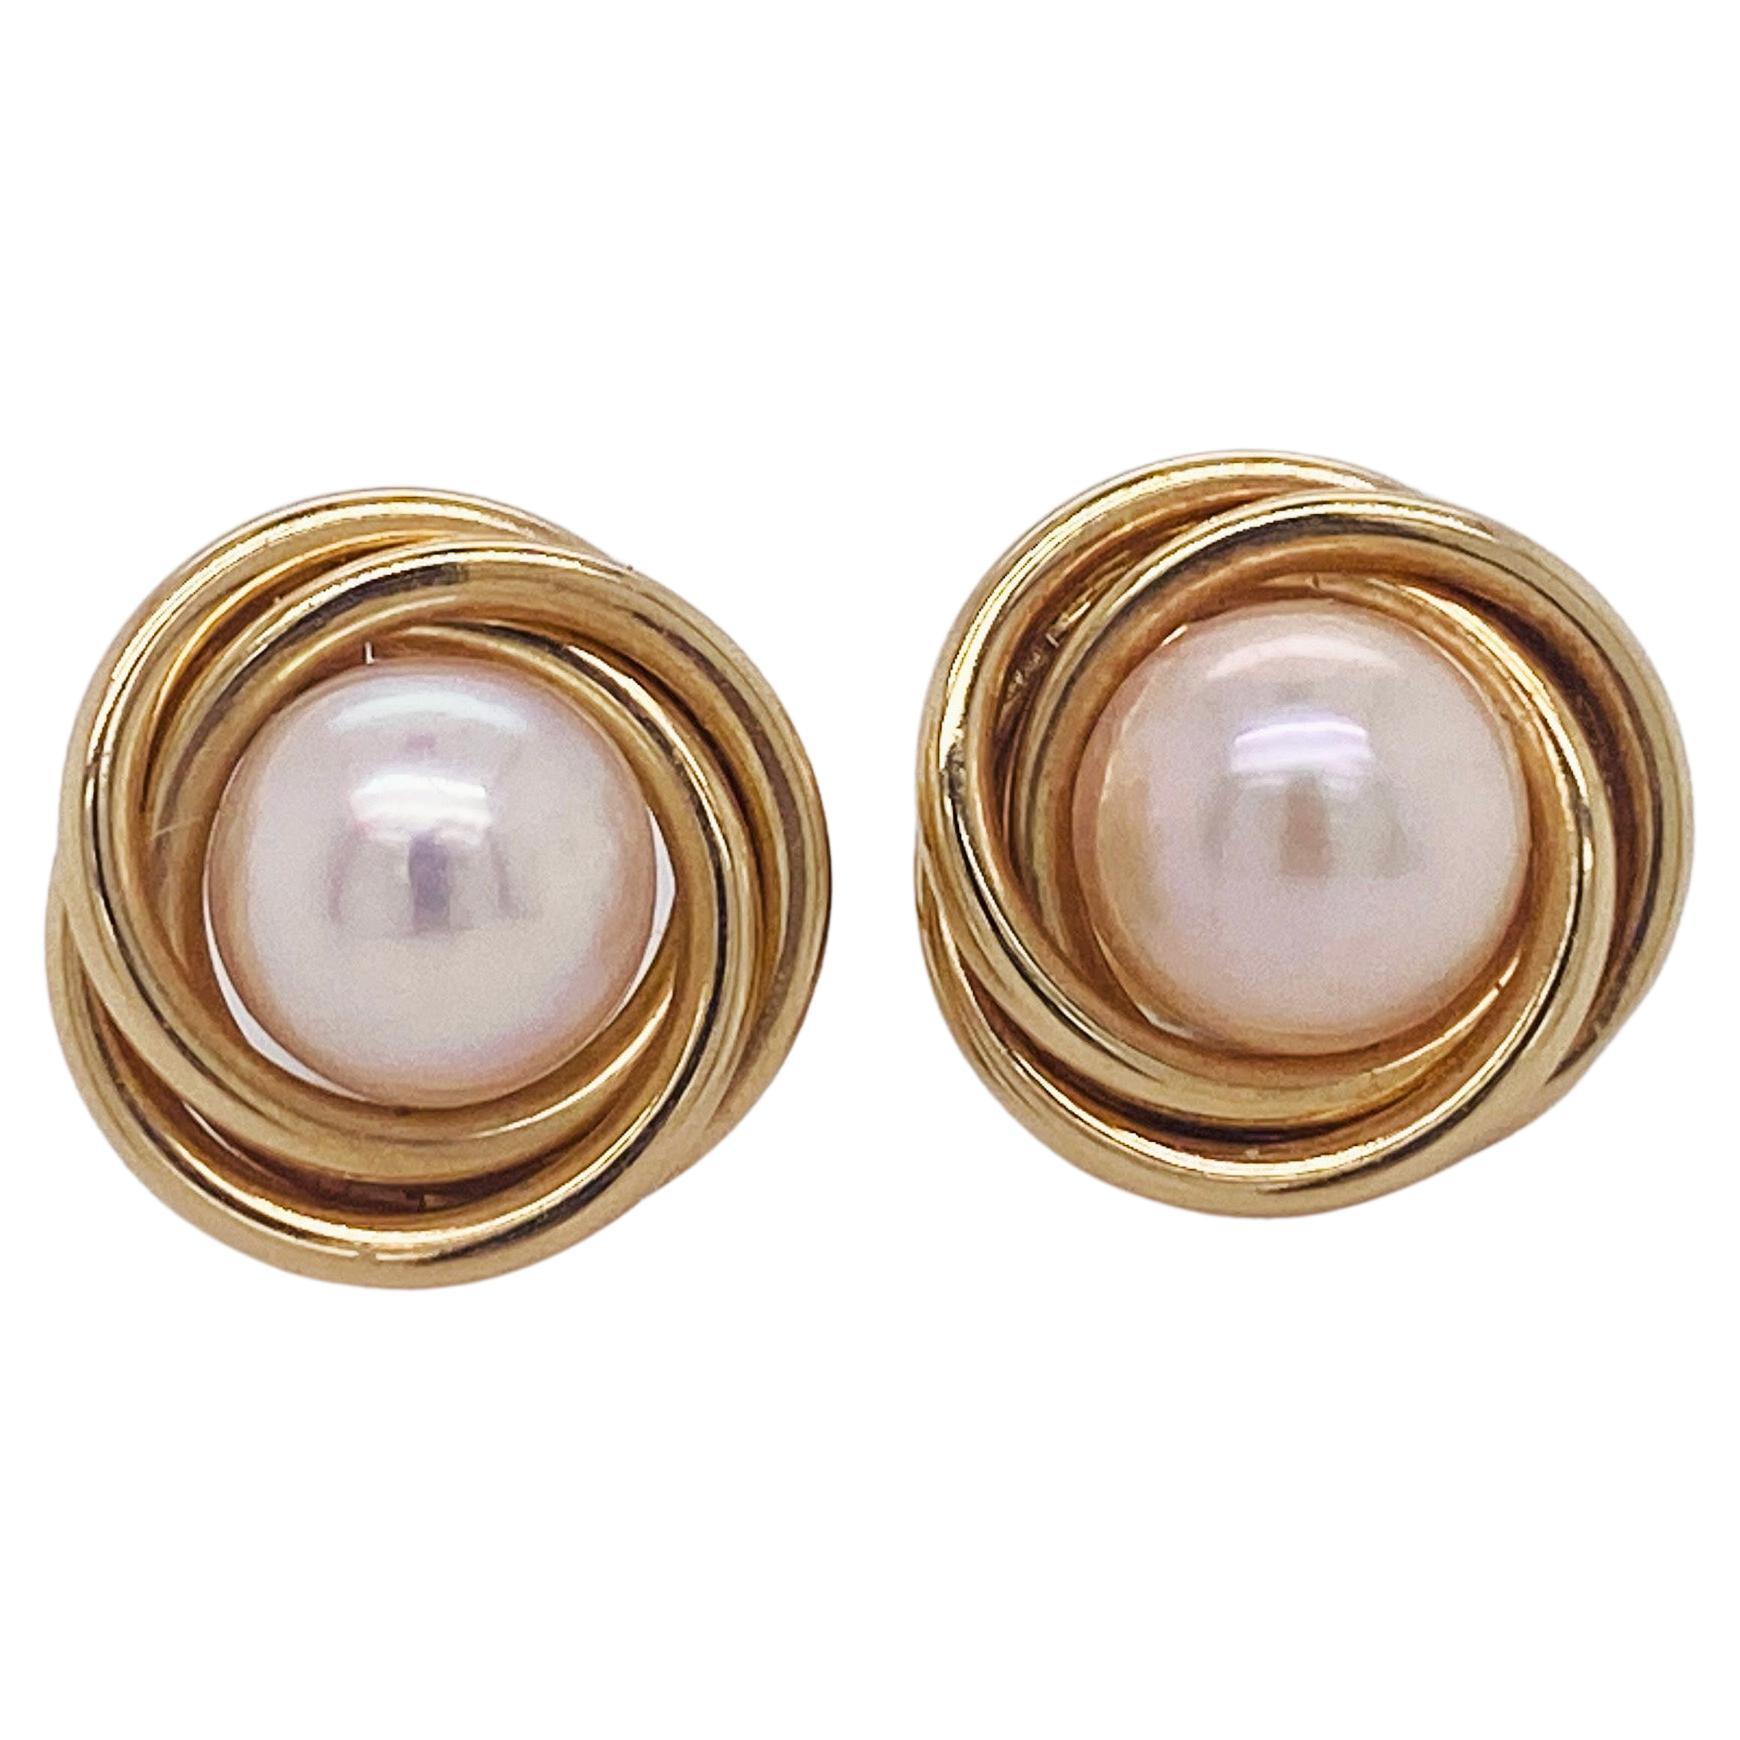 Buy Isadora South Sea Pearl Earrings 10mm diameter Pearls set with 9ct  White Gold Posts | Qantas Marketplace